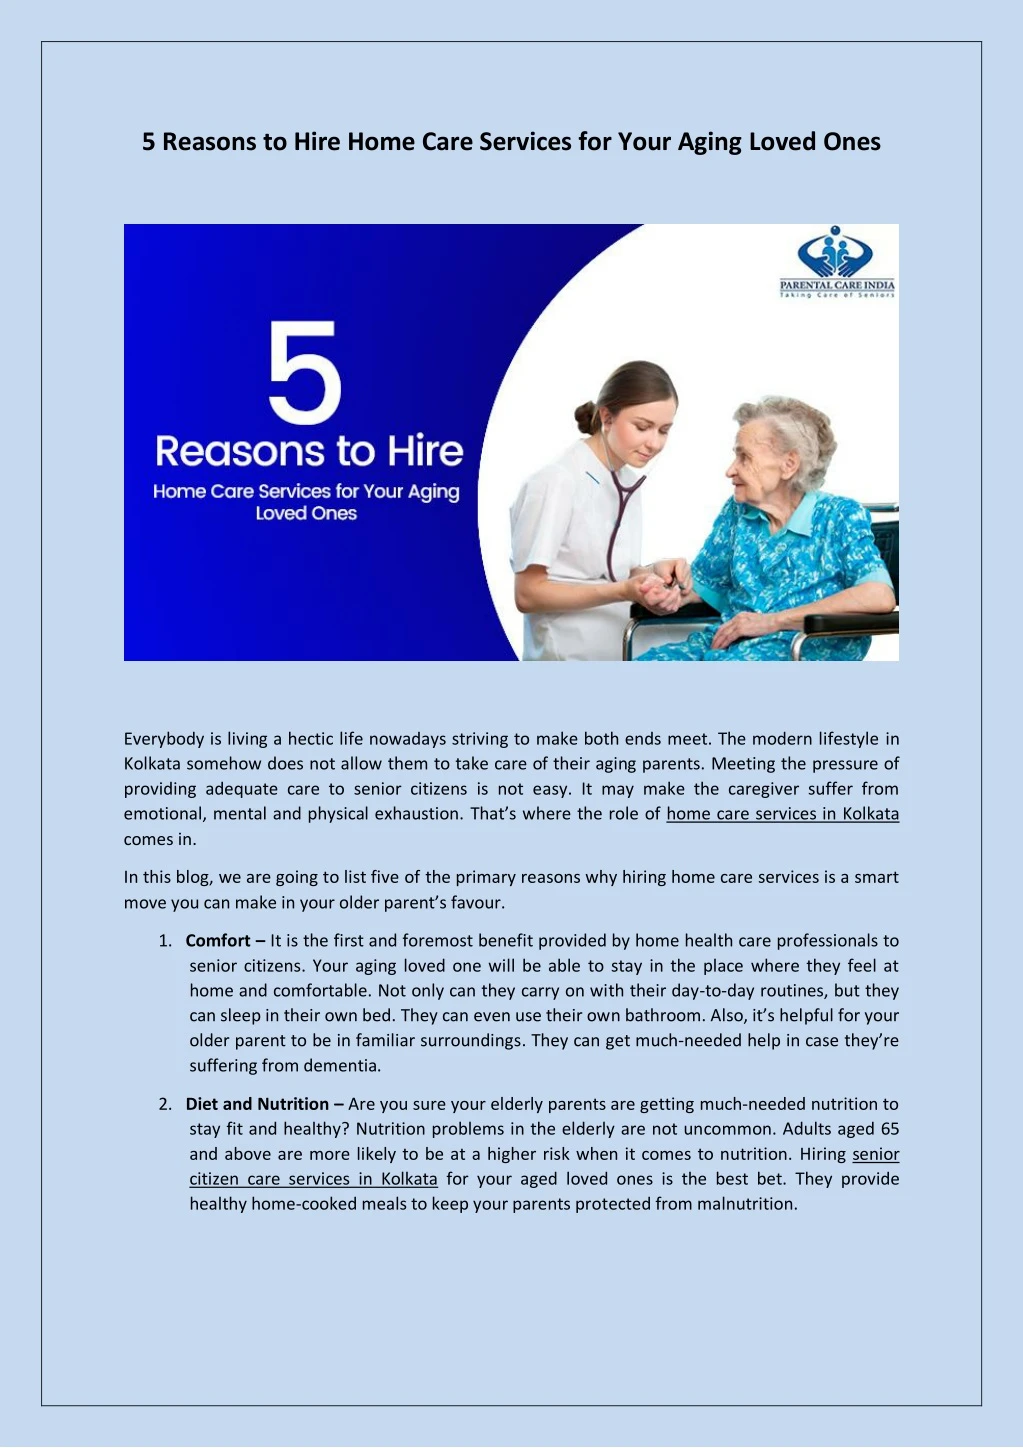 5 reasons to hire home care services for your